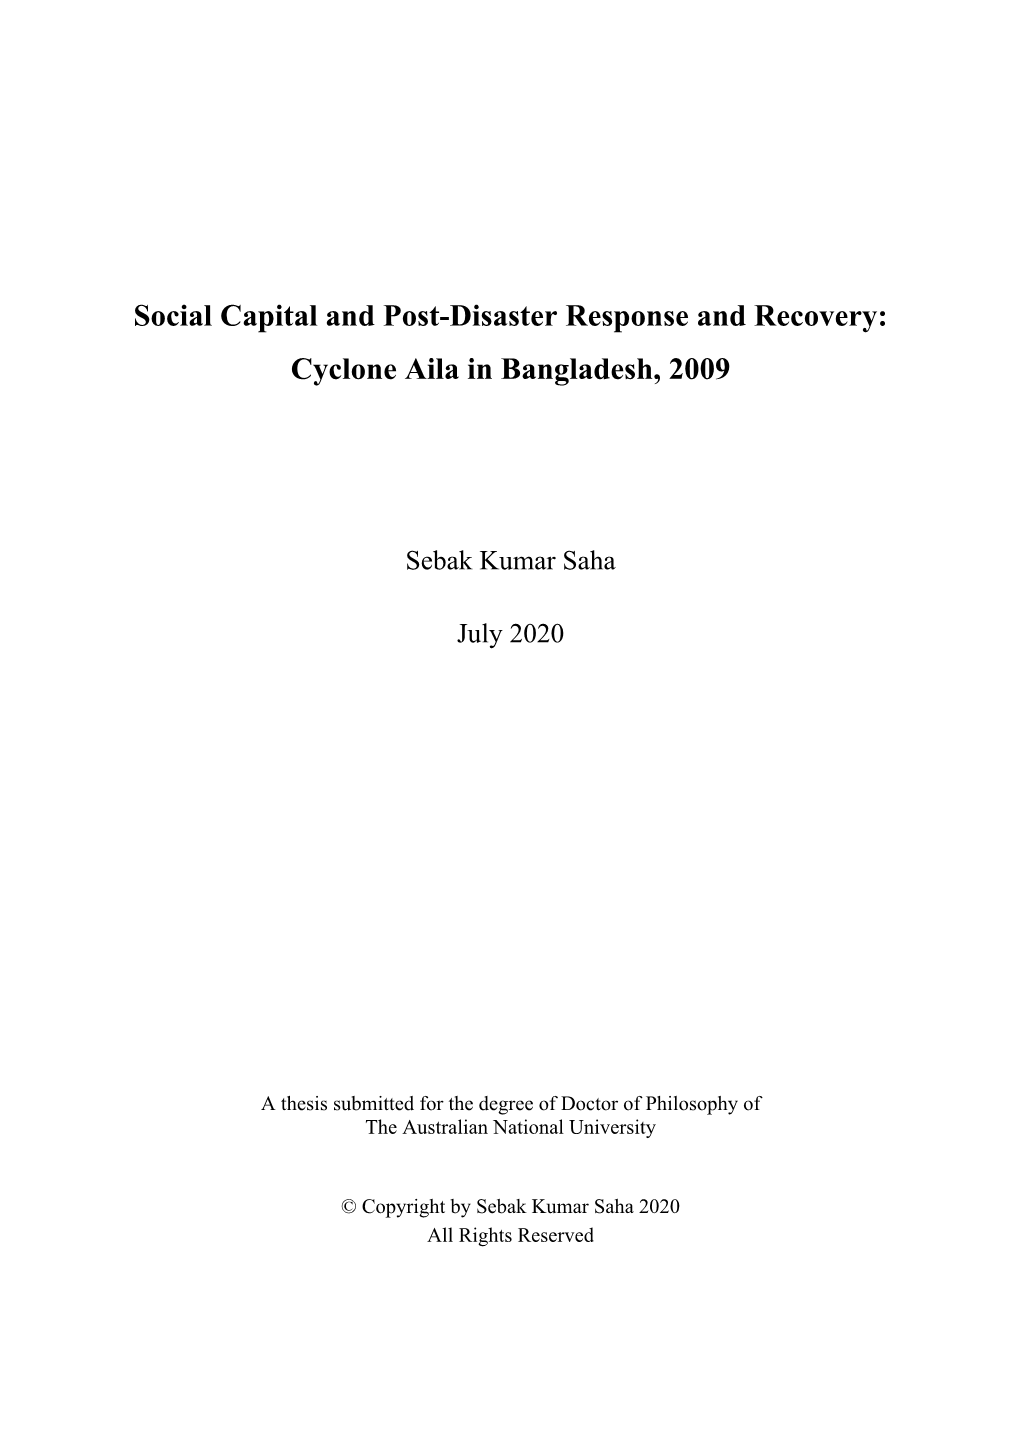 Social Capital and Post-Disaster Response and Recovery: Cyclone Aila in Bangladesh, 2009